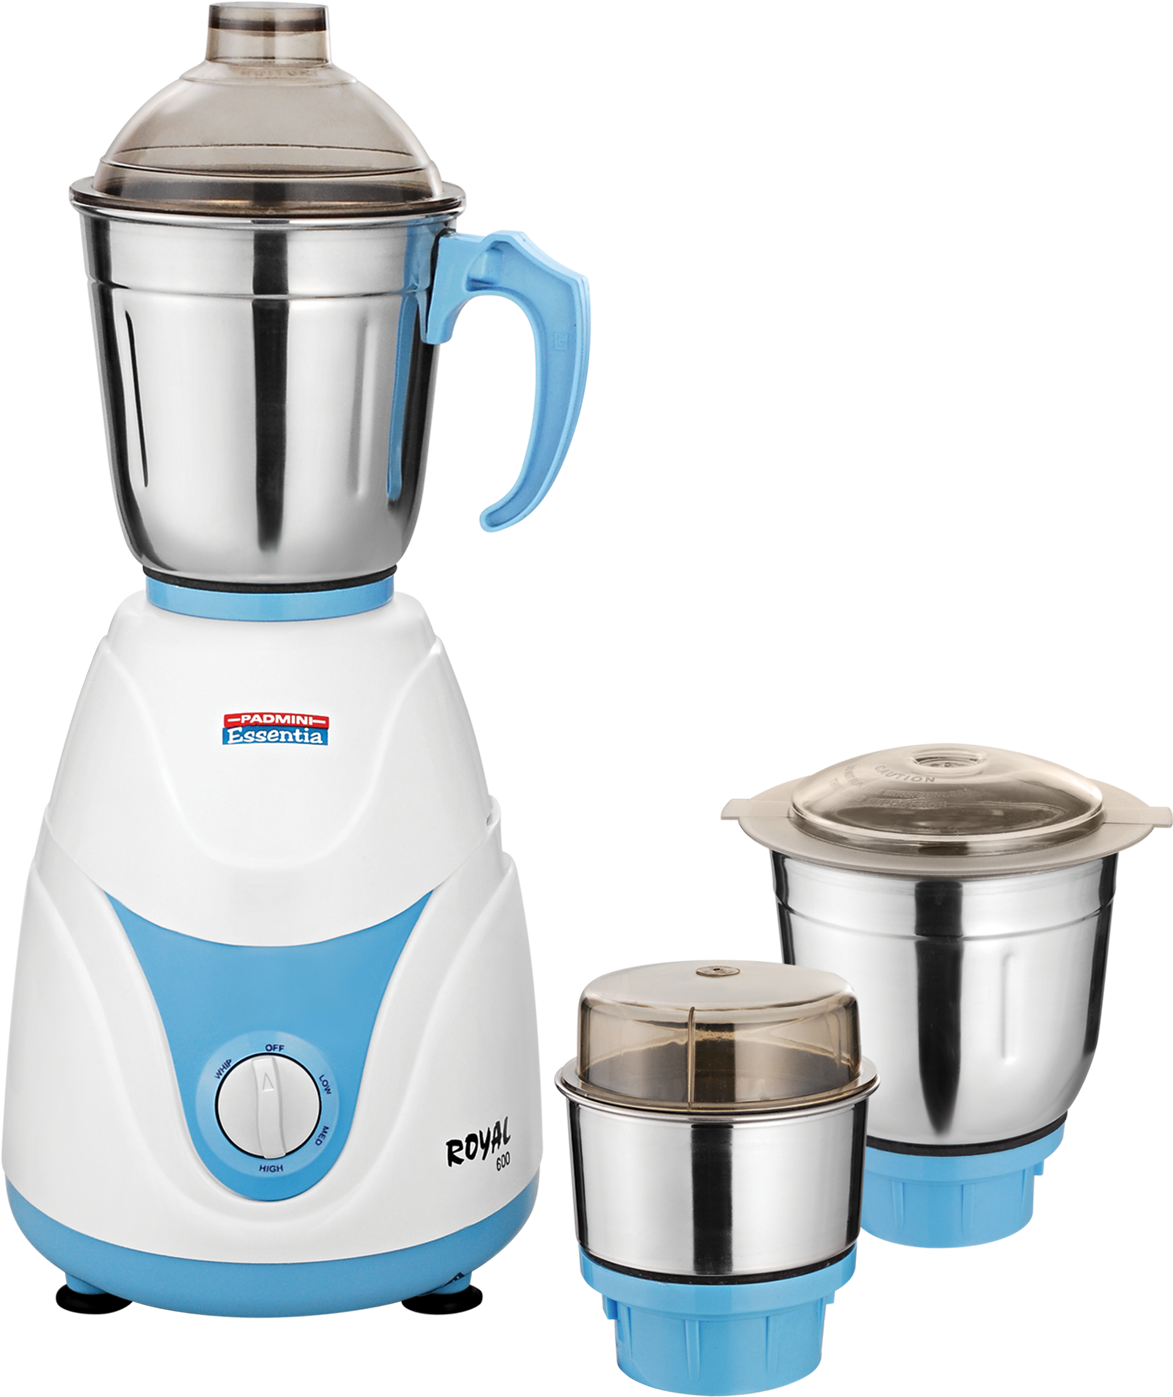 Mixer Grinderwith Jars Home Appliance PNG image